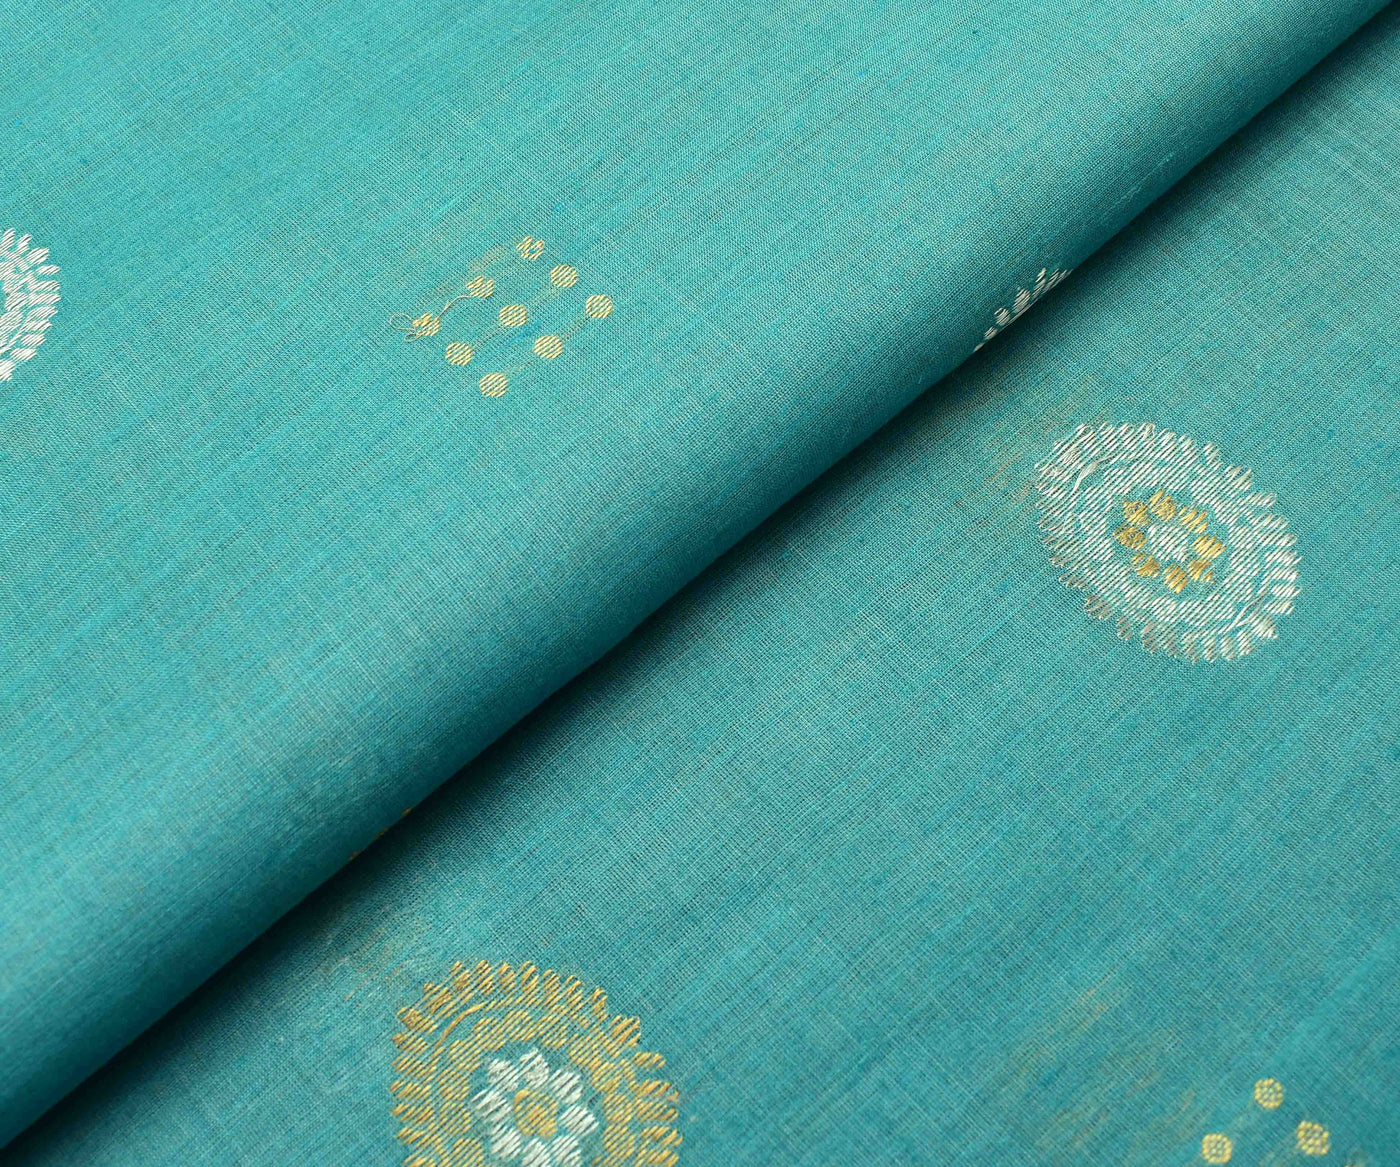 blue-tussar-fabric-with-gold-and-silver-zari-butta-highlights